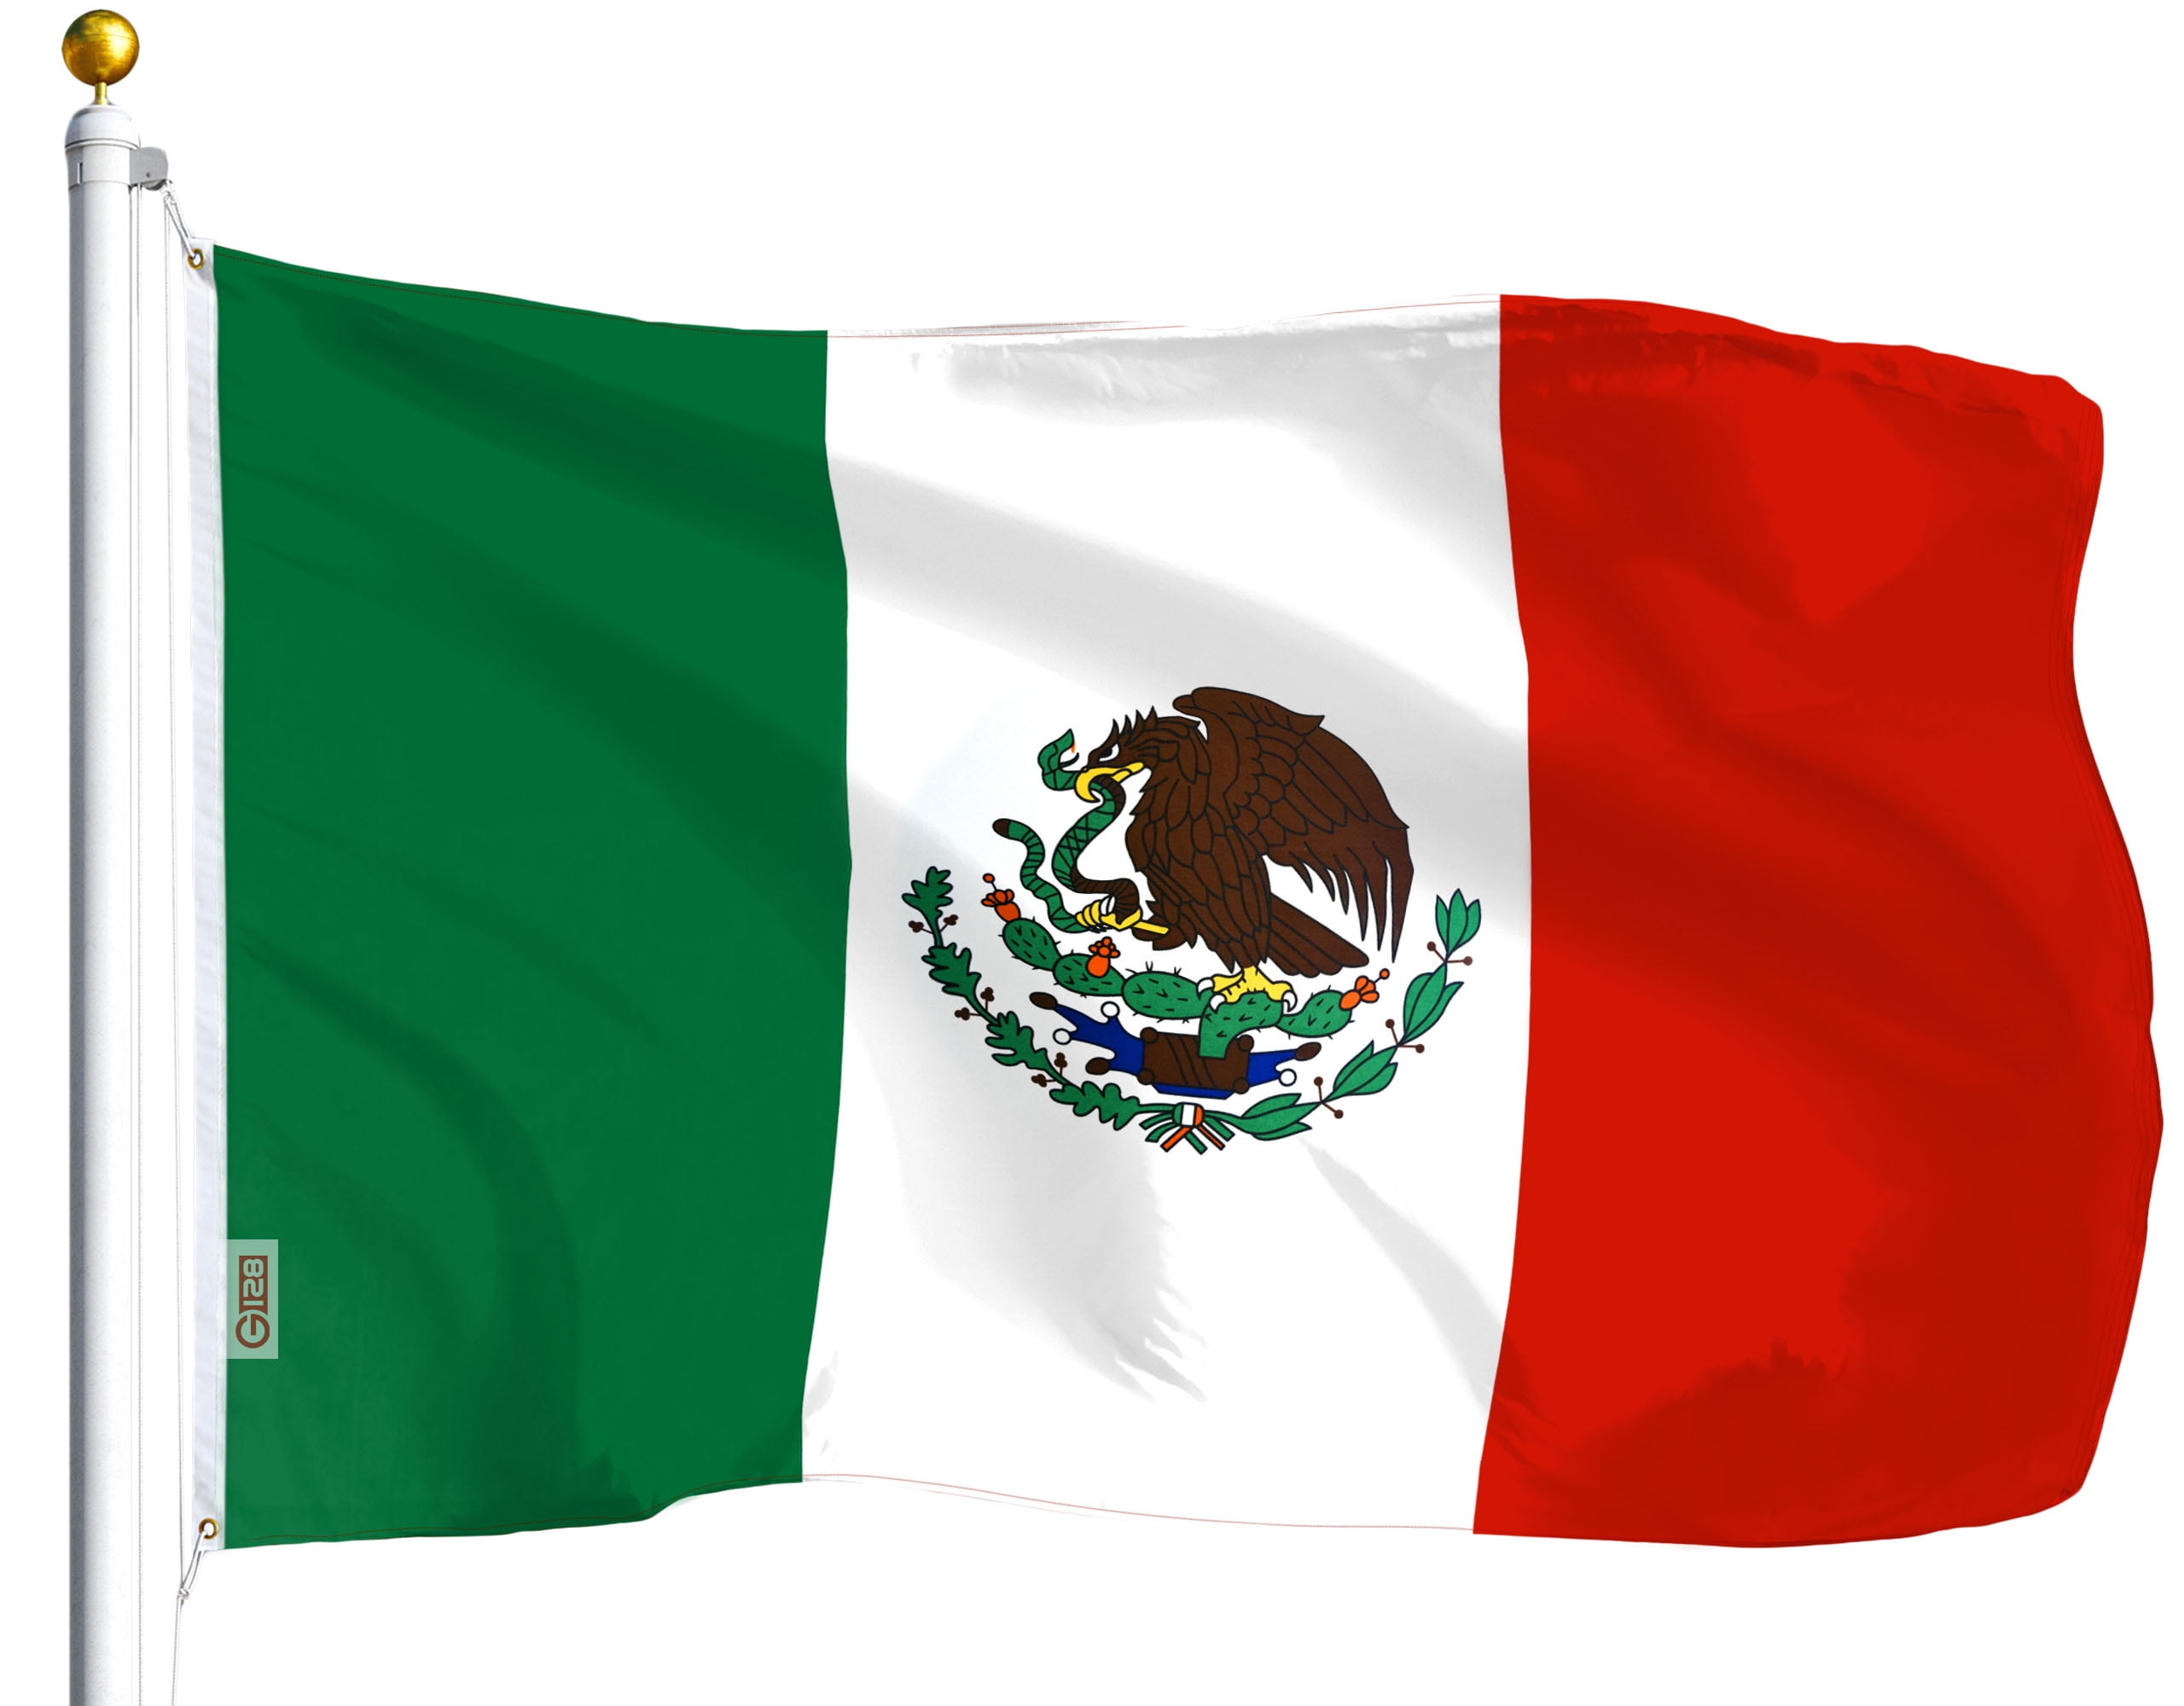 G128 - Mexico (Mexican) Flag | 3x5 feet | Printed - Vibrant Colors